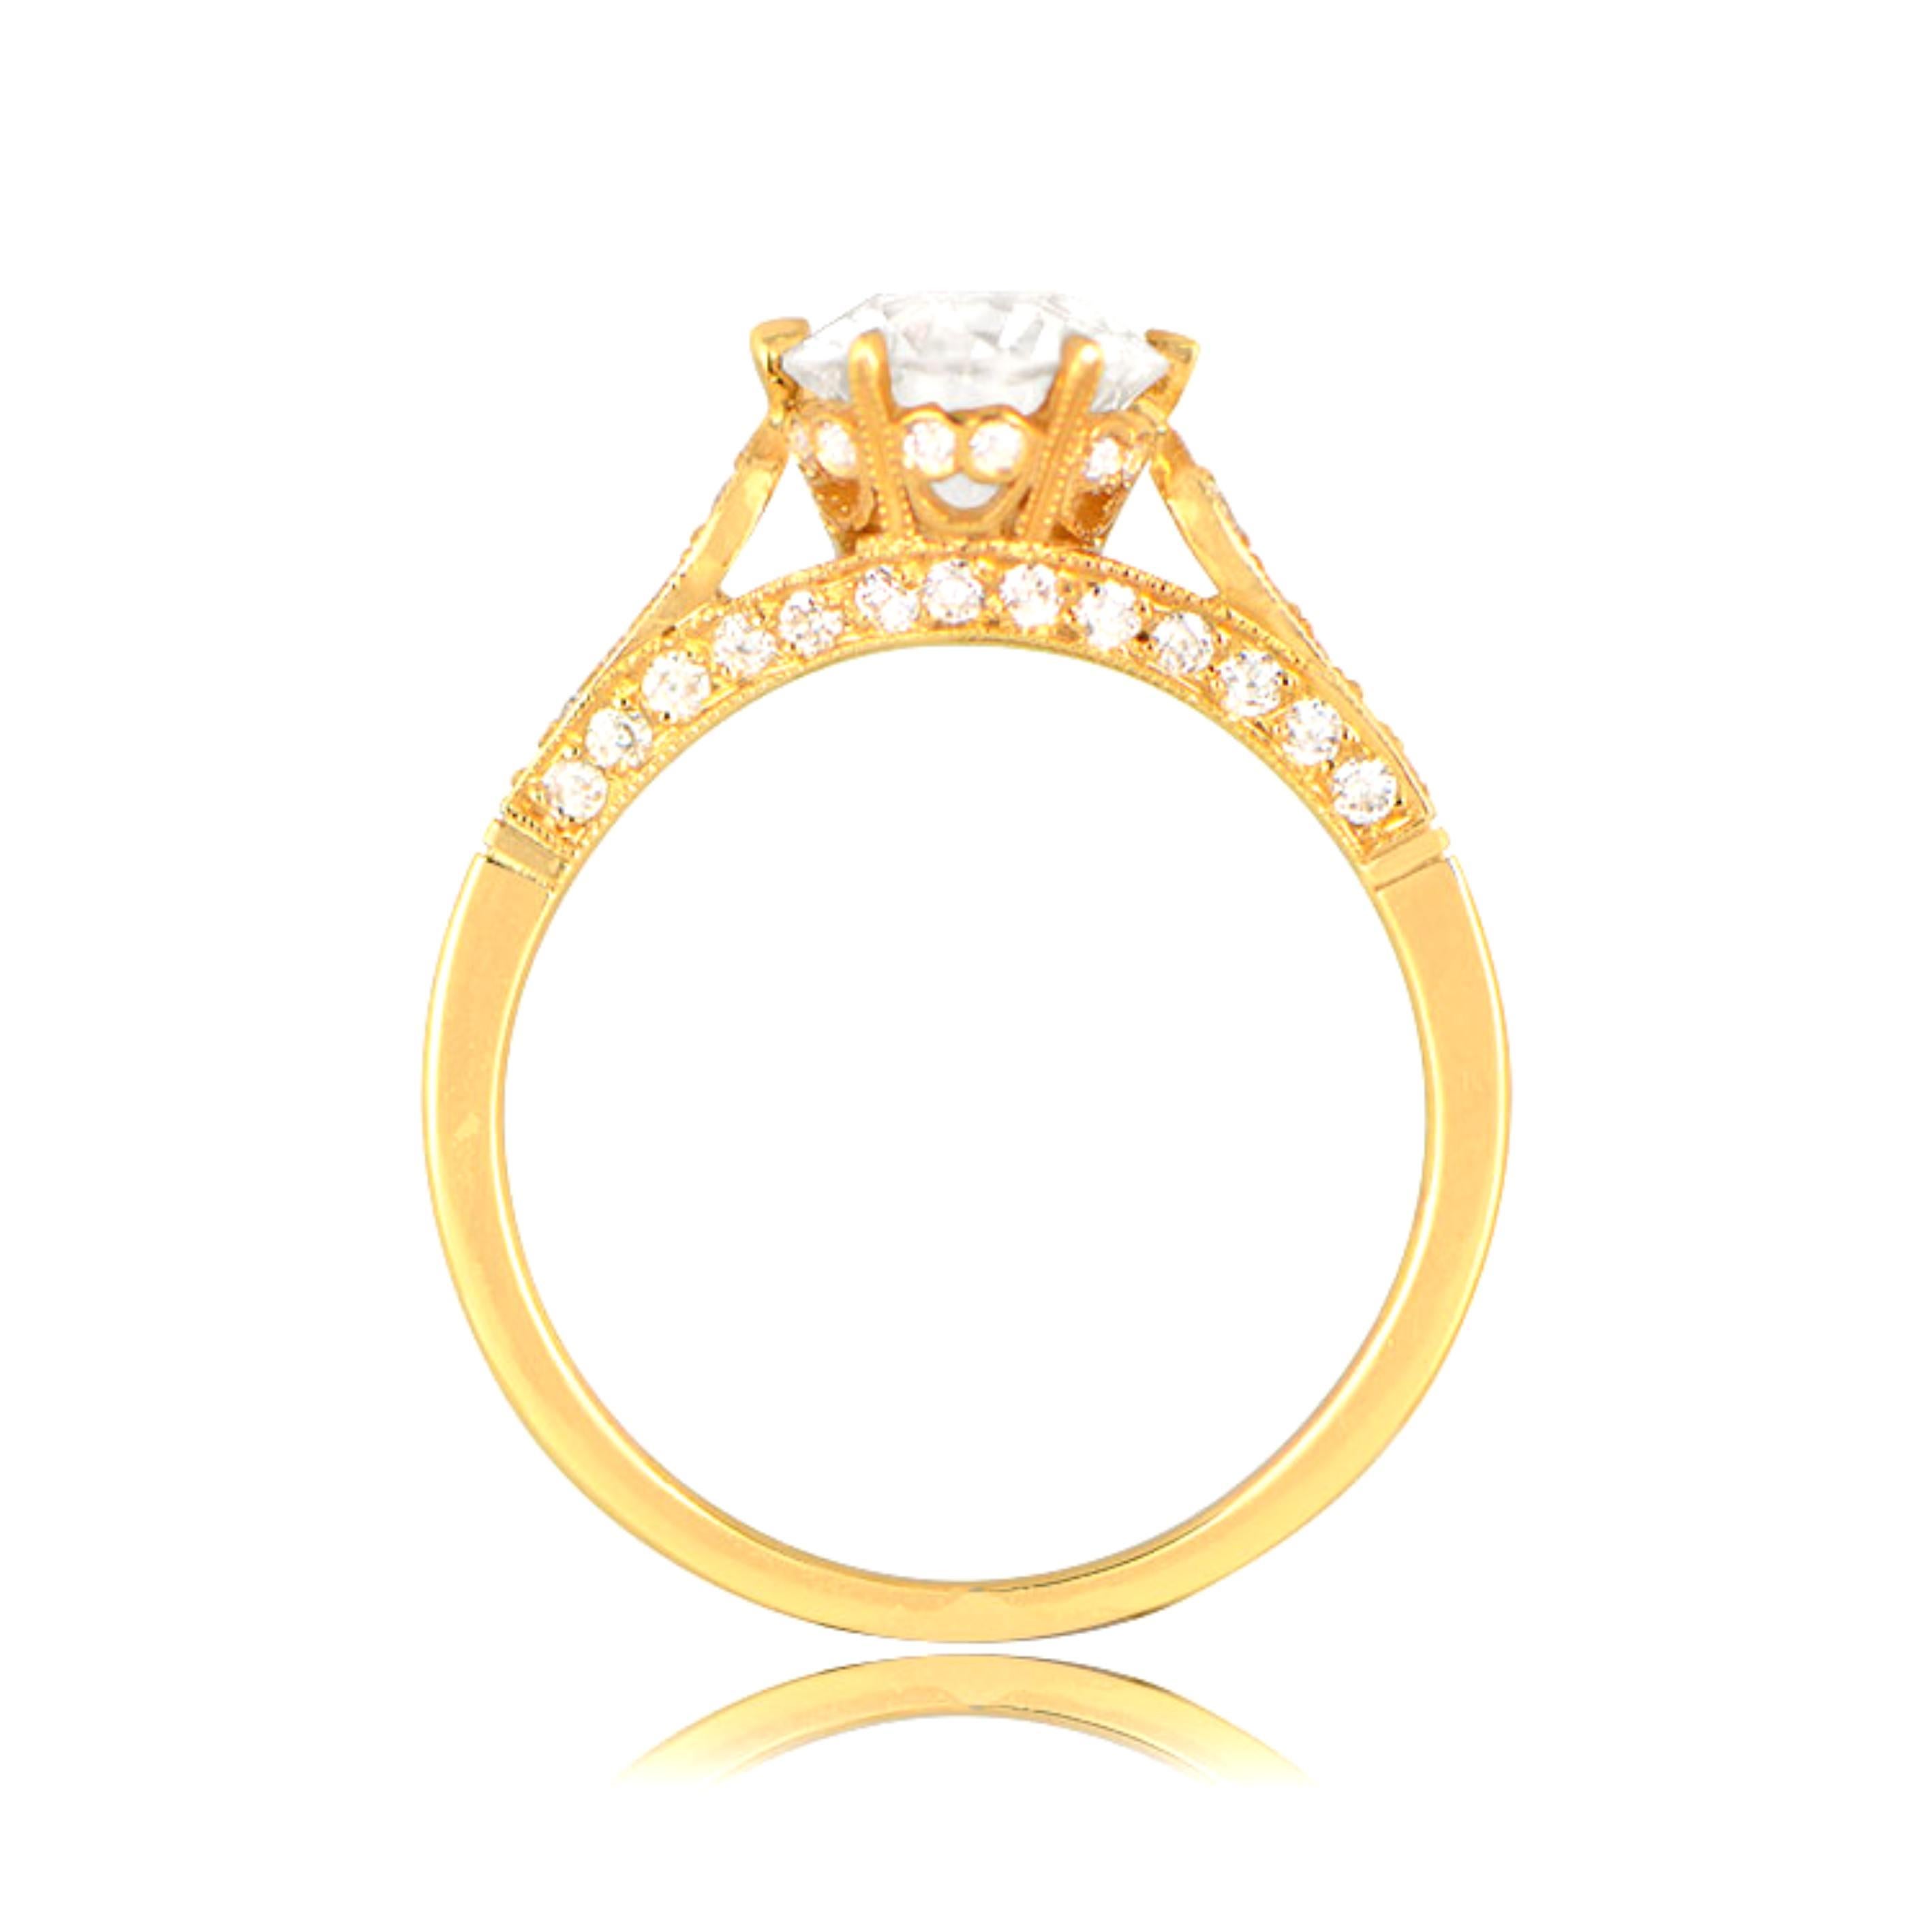 This crown-style diamond solitaire engagement ring features a 1.41 carat old European cut diamond, K color and VS1 clarity, and is handcrafted in 18k yellow gold. The ring is decorated with fine milgrain and smaller old European cut diamonds set on